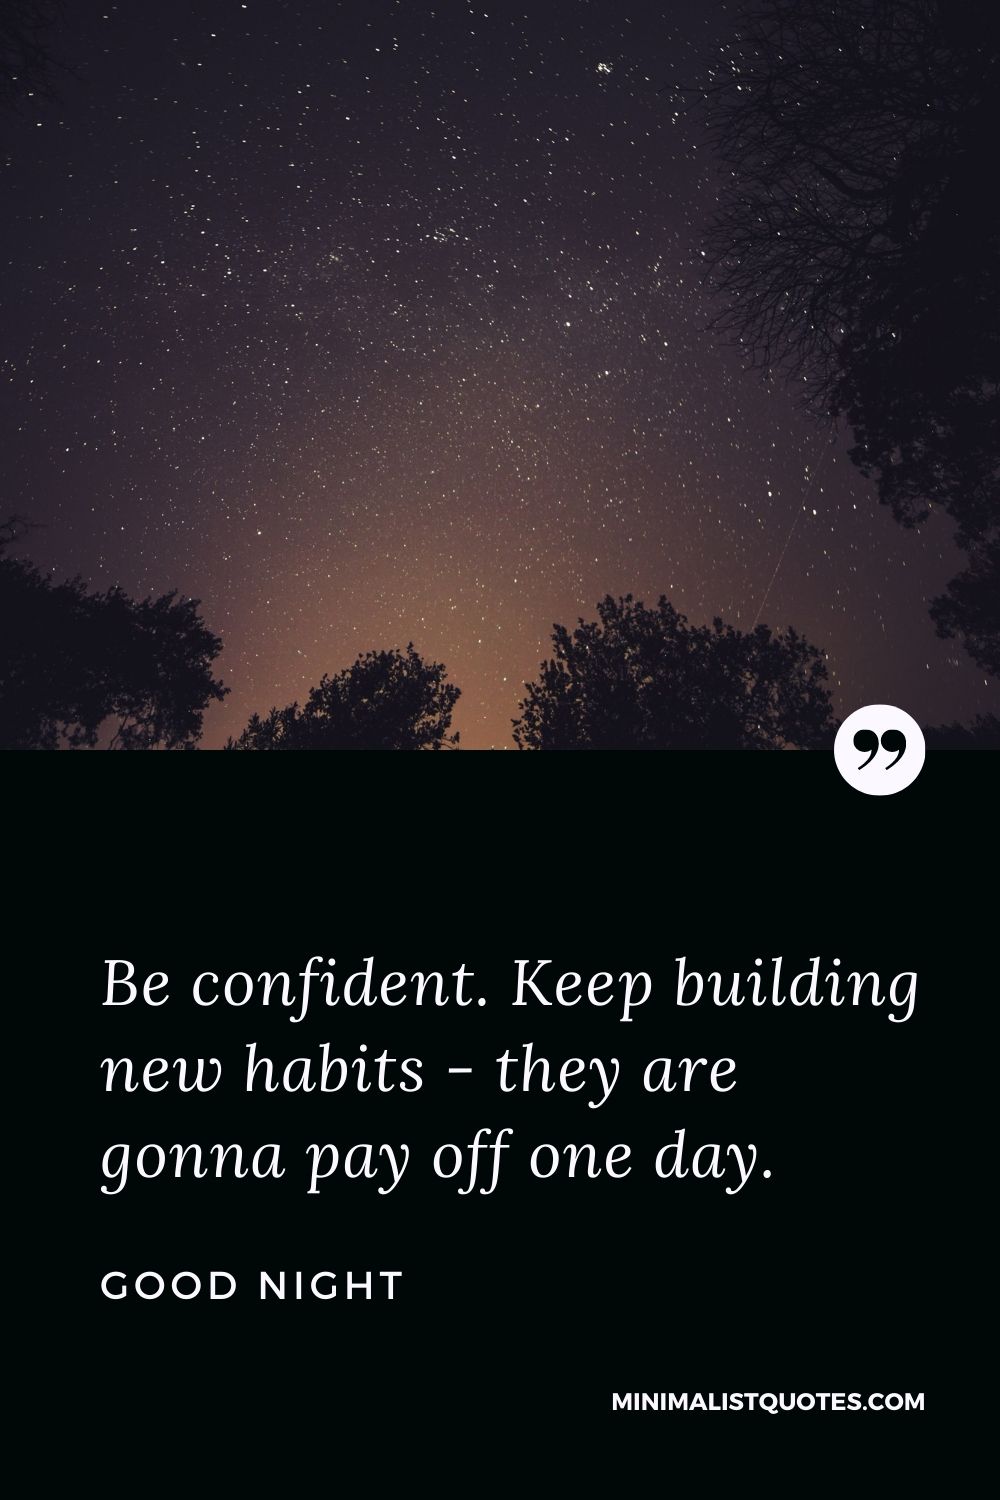 Good Night Wishes - Be confident. Keep building new habits - they are gonna pay off one day.